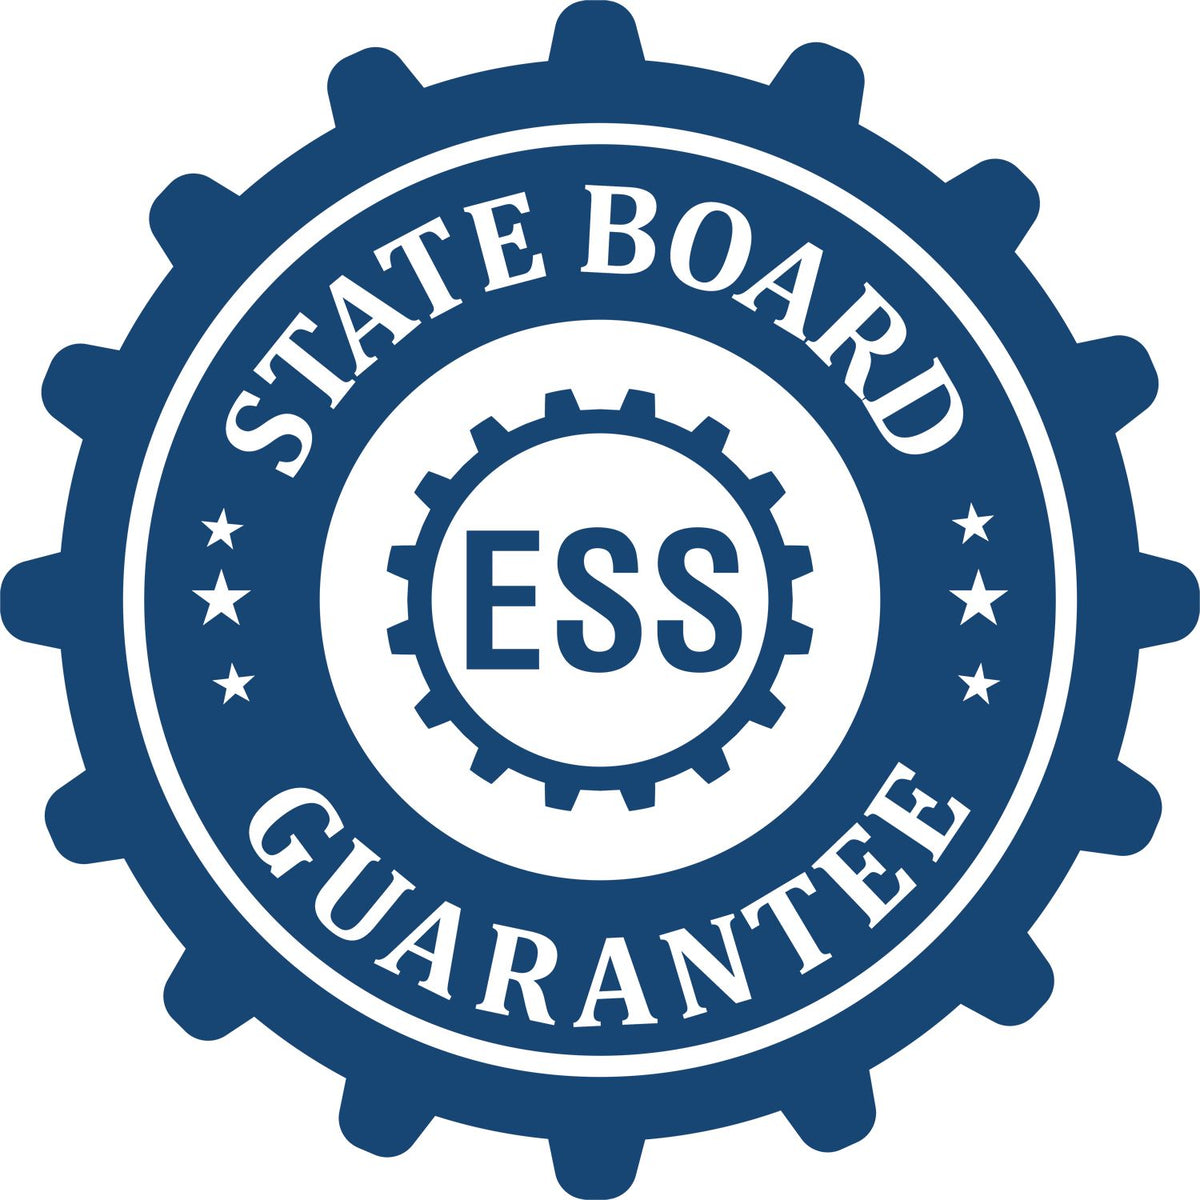 An emblem in a gear shape illustrating a state board guarantee for the Premium MaxLight Pre-Inked Virginia Engineering Stamp product.